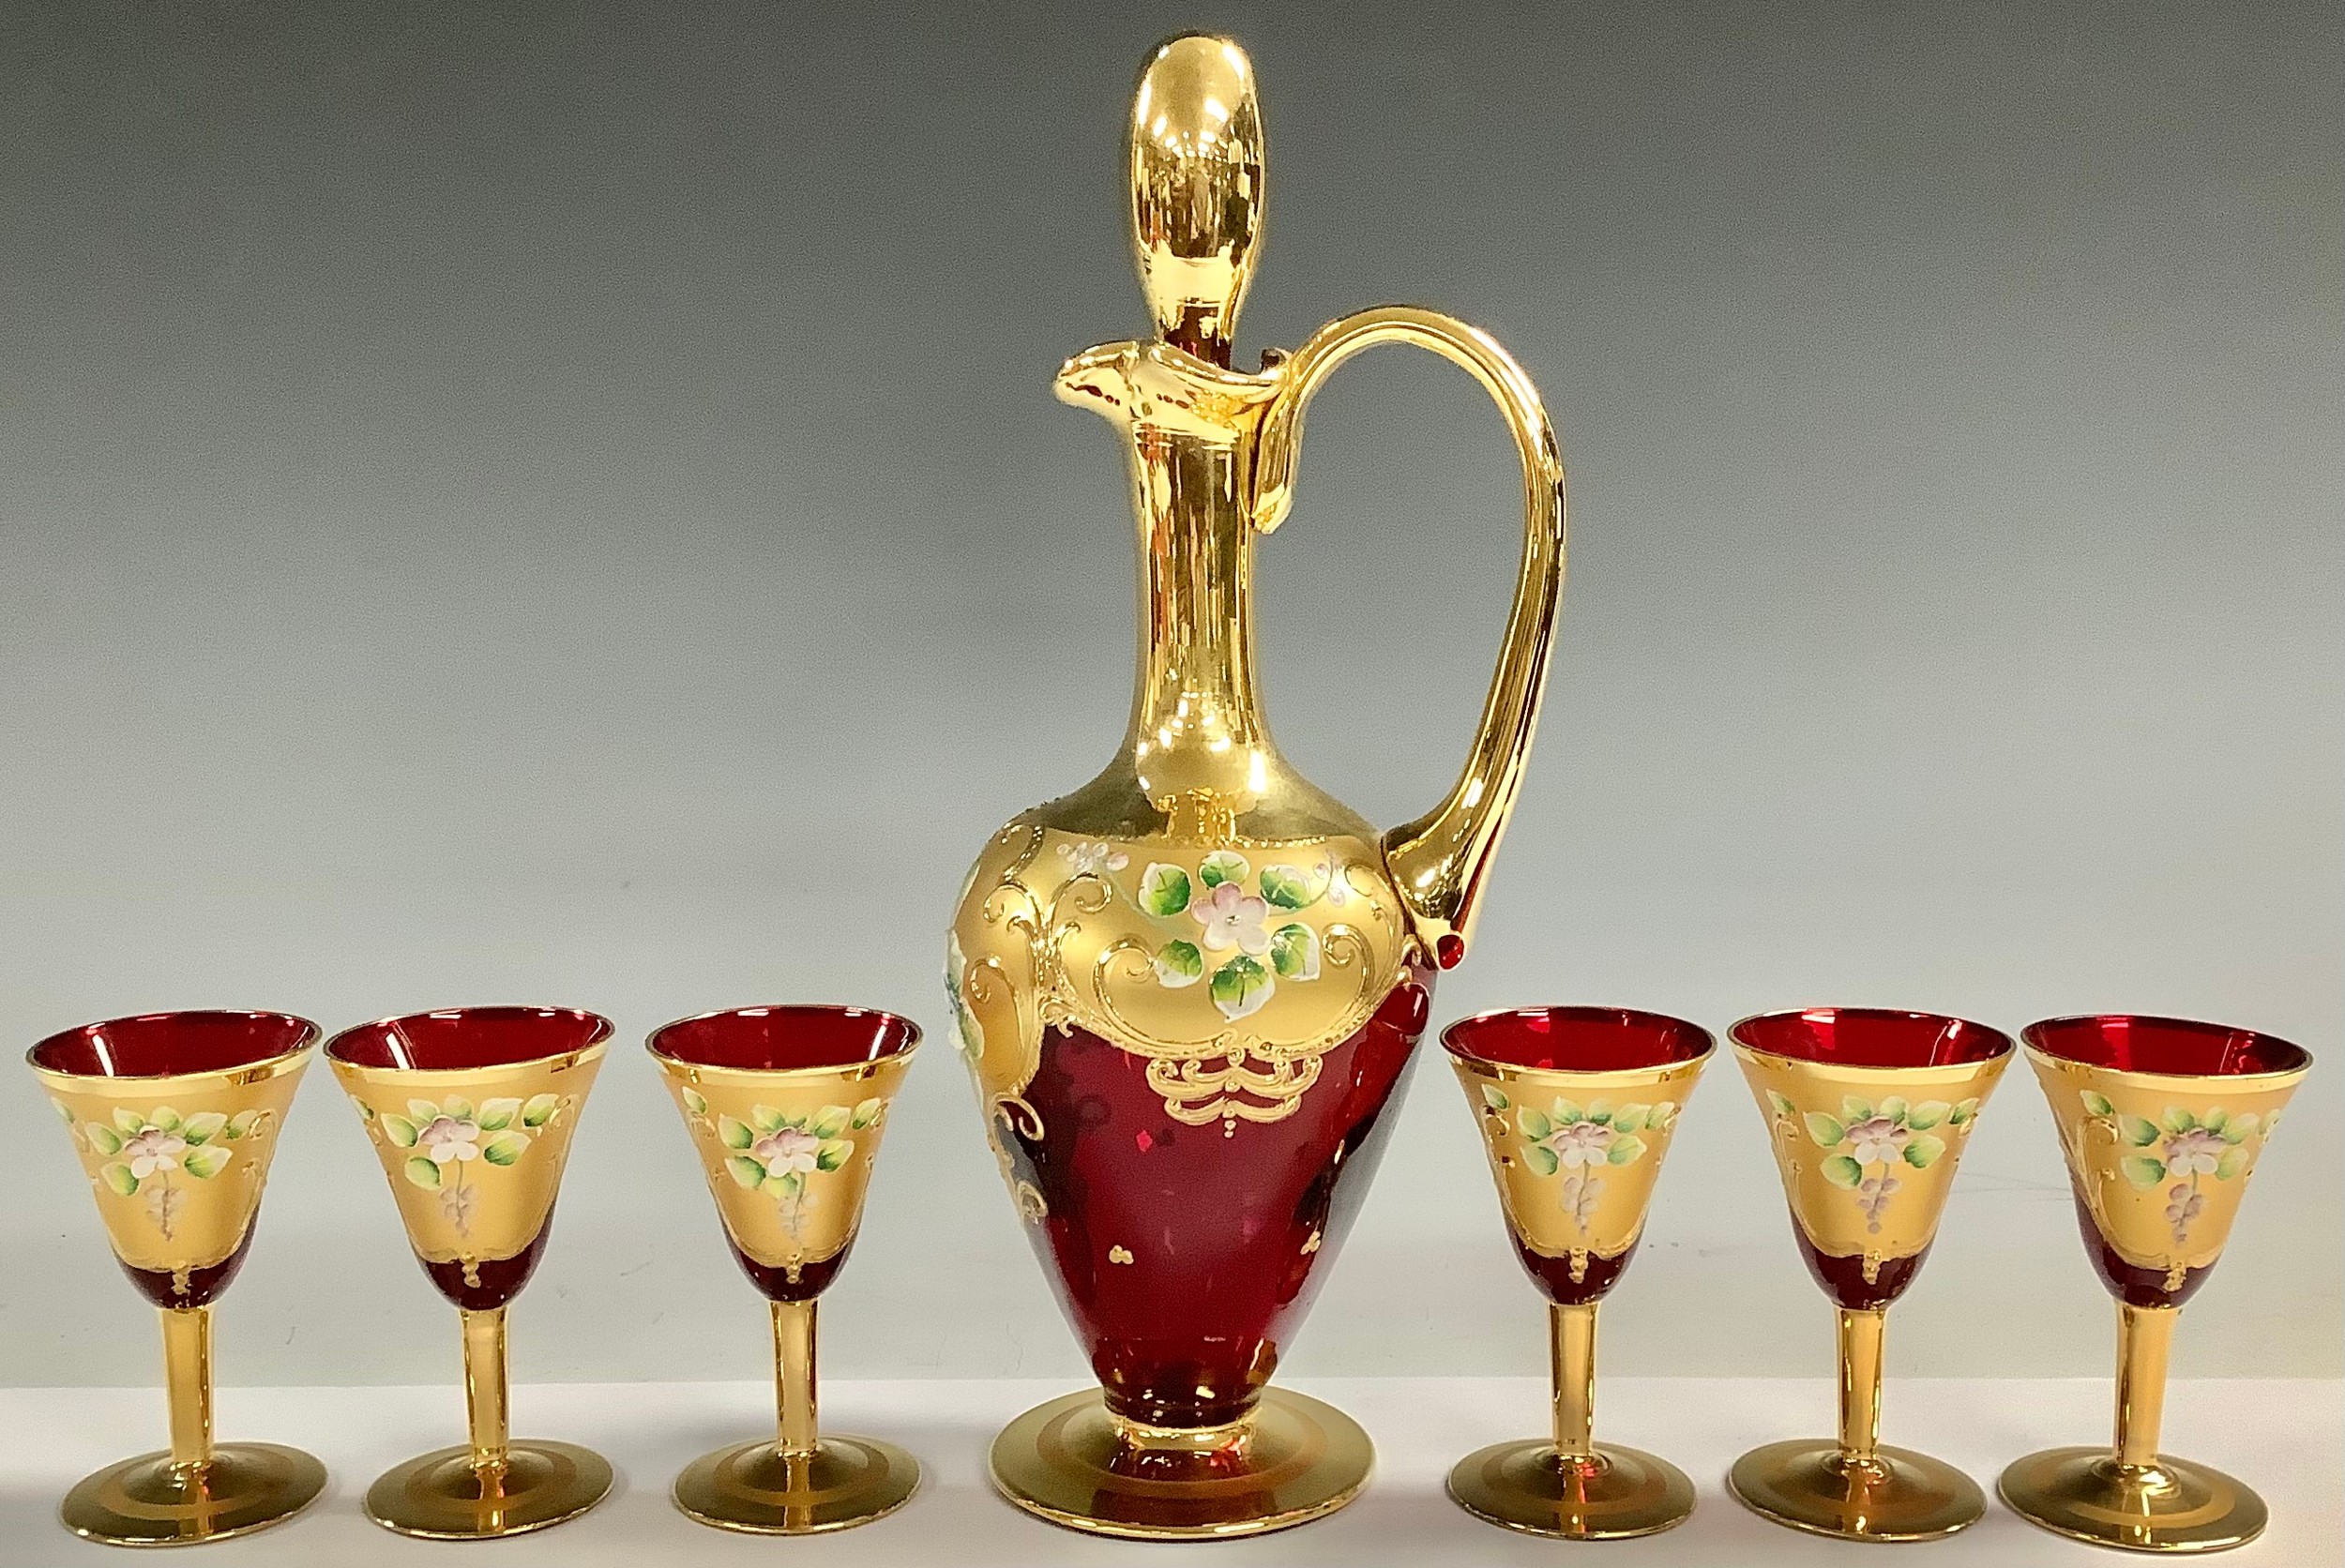 A Murano ruby glass decanter and six wine glasses, gilded and painted with flowers in relief; a